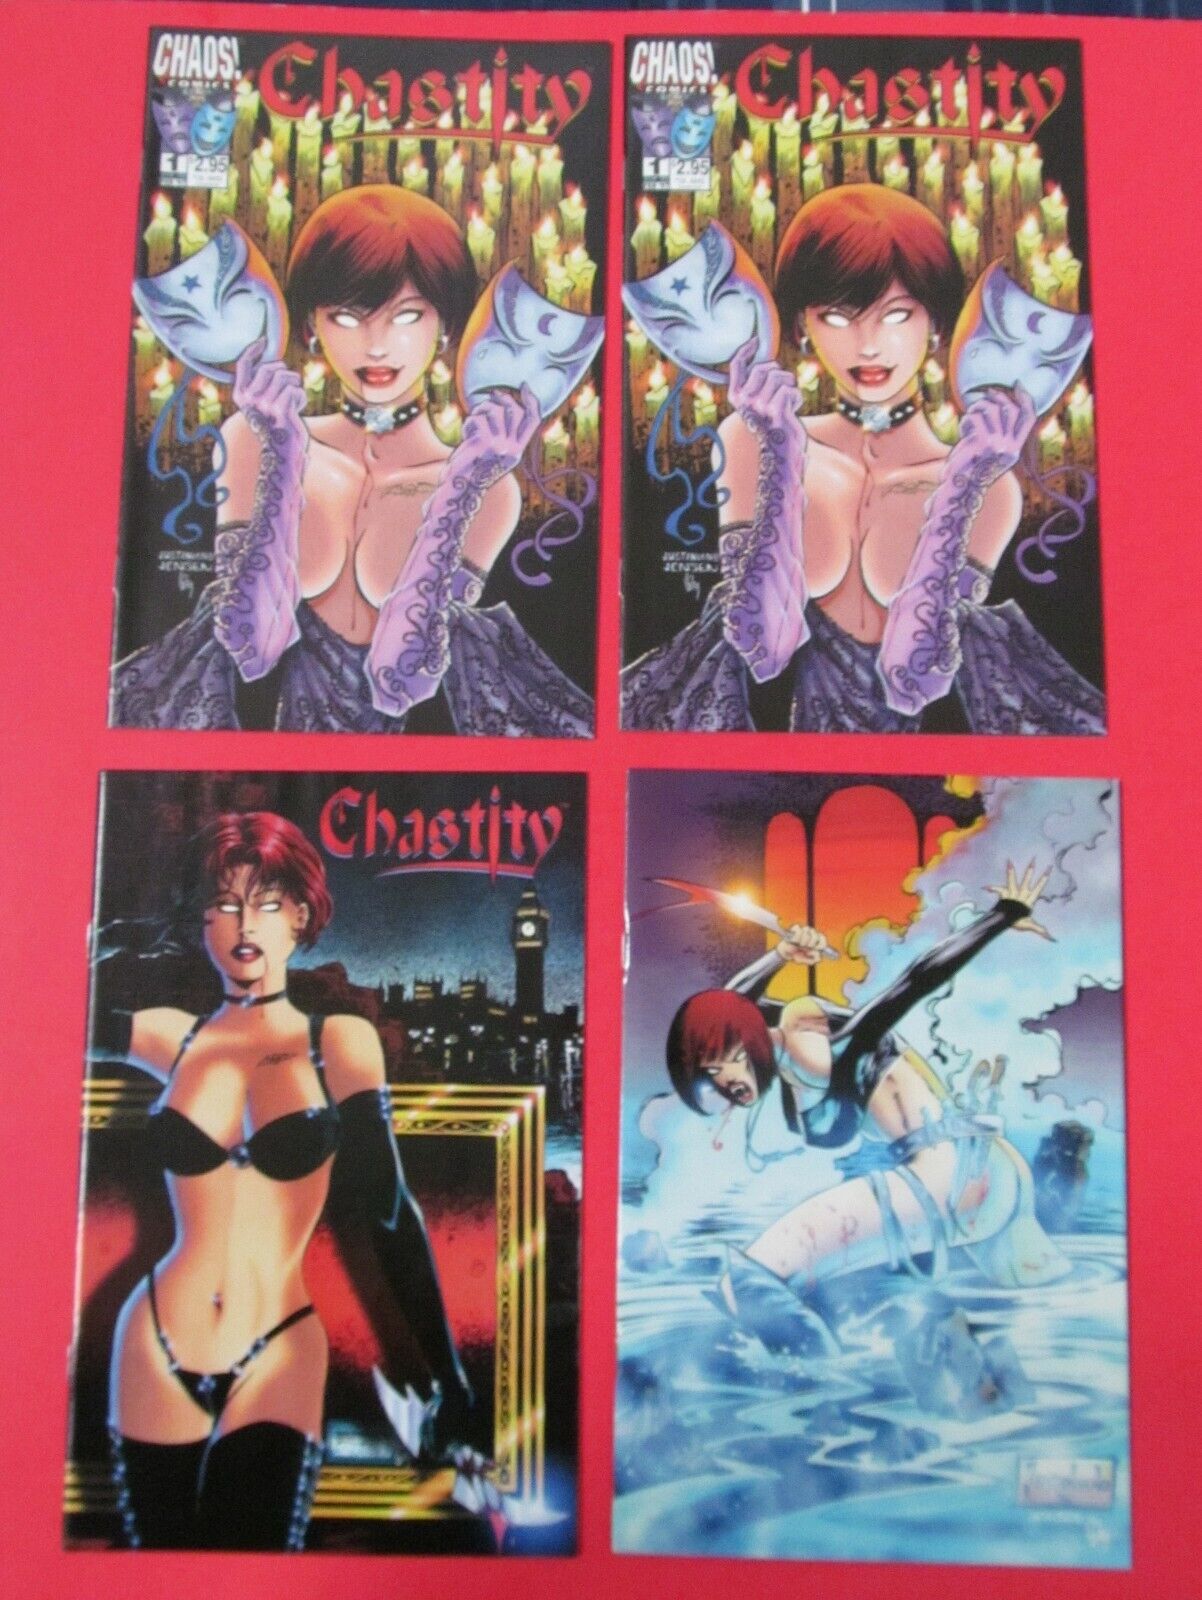 Chastity Theatre of Pain #1-3 Complete Set - Chaos Comics 1997